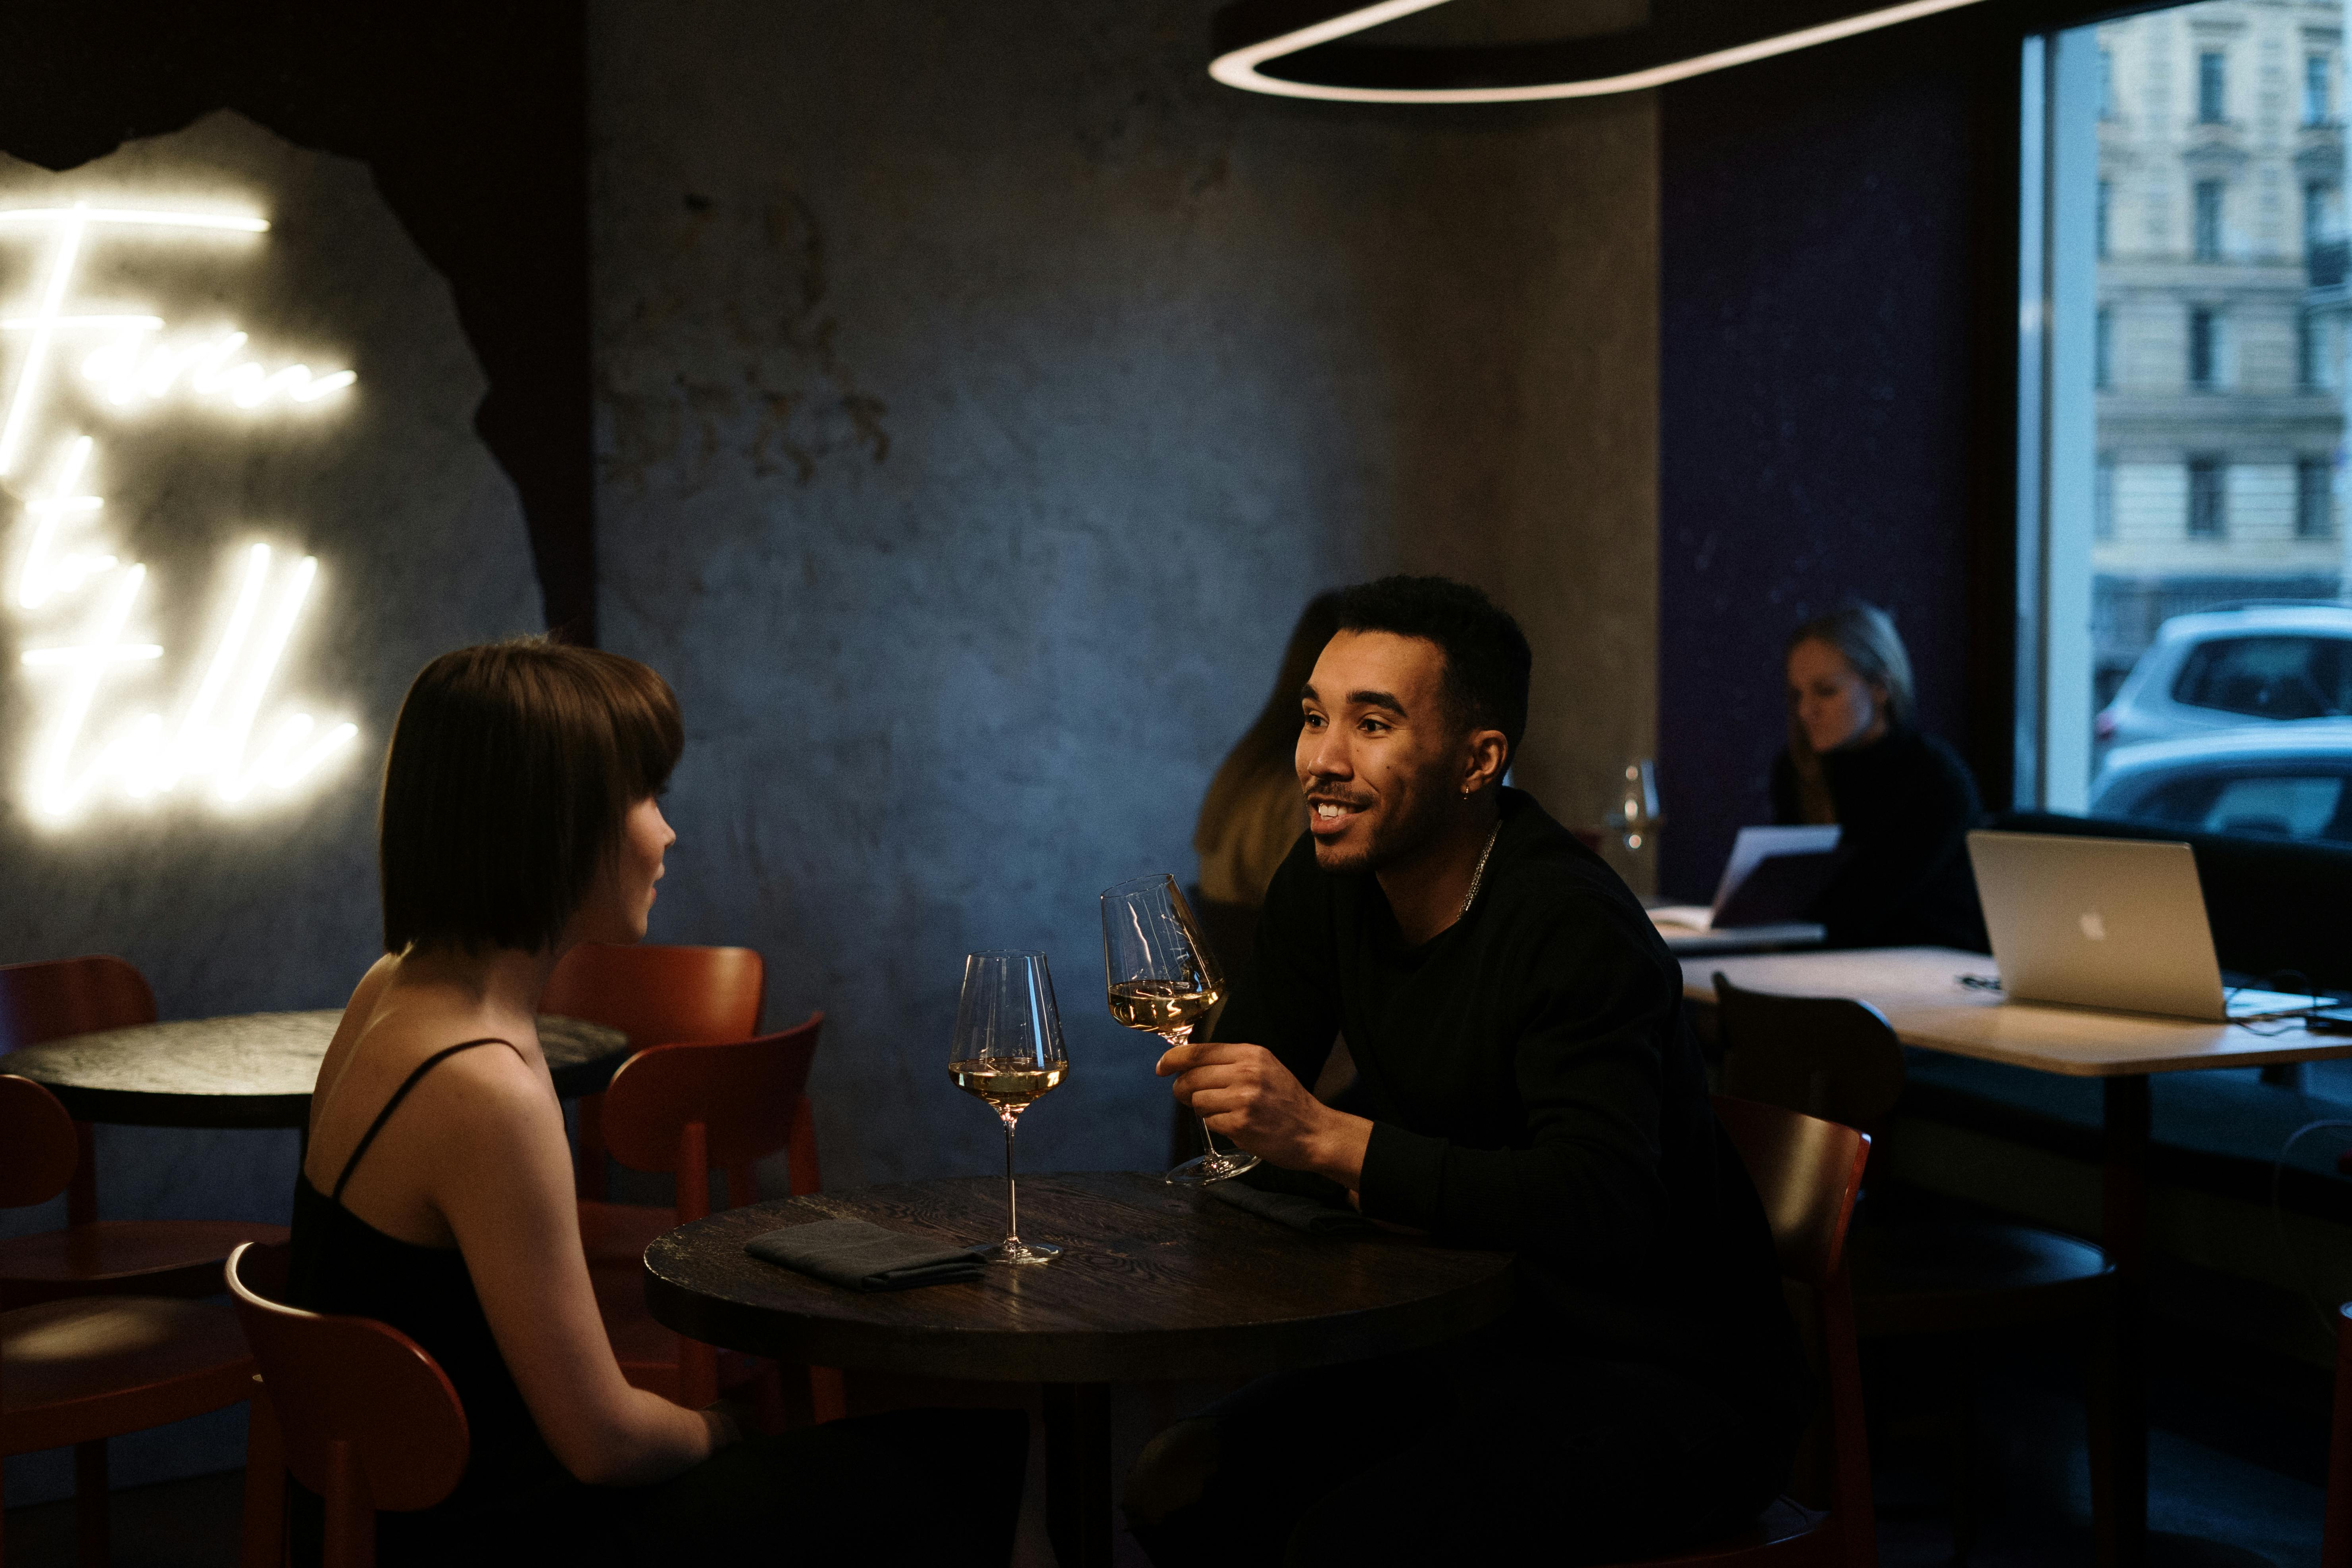 man and woman sitting in a dimly lit restaurant sharing glasses of wine together